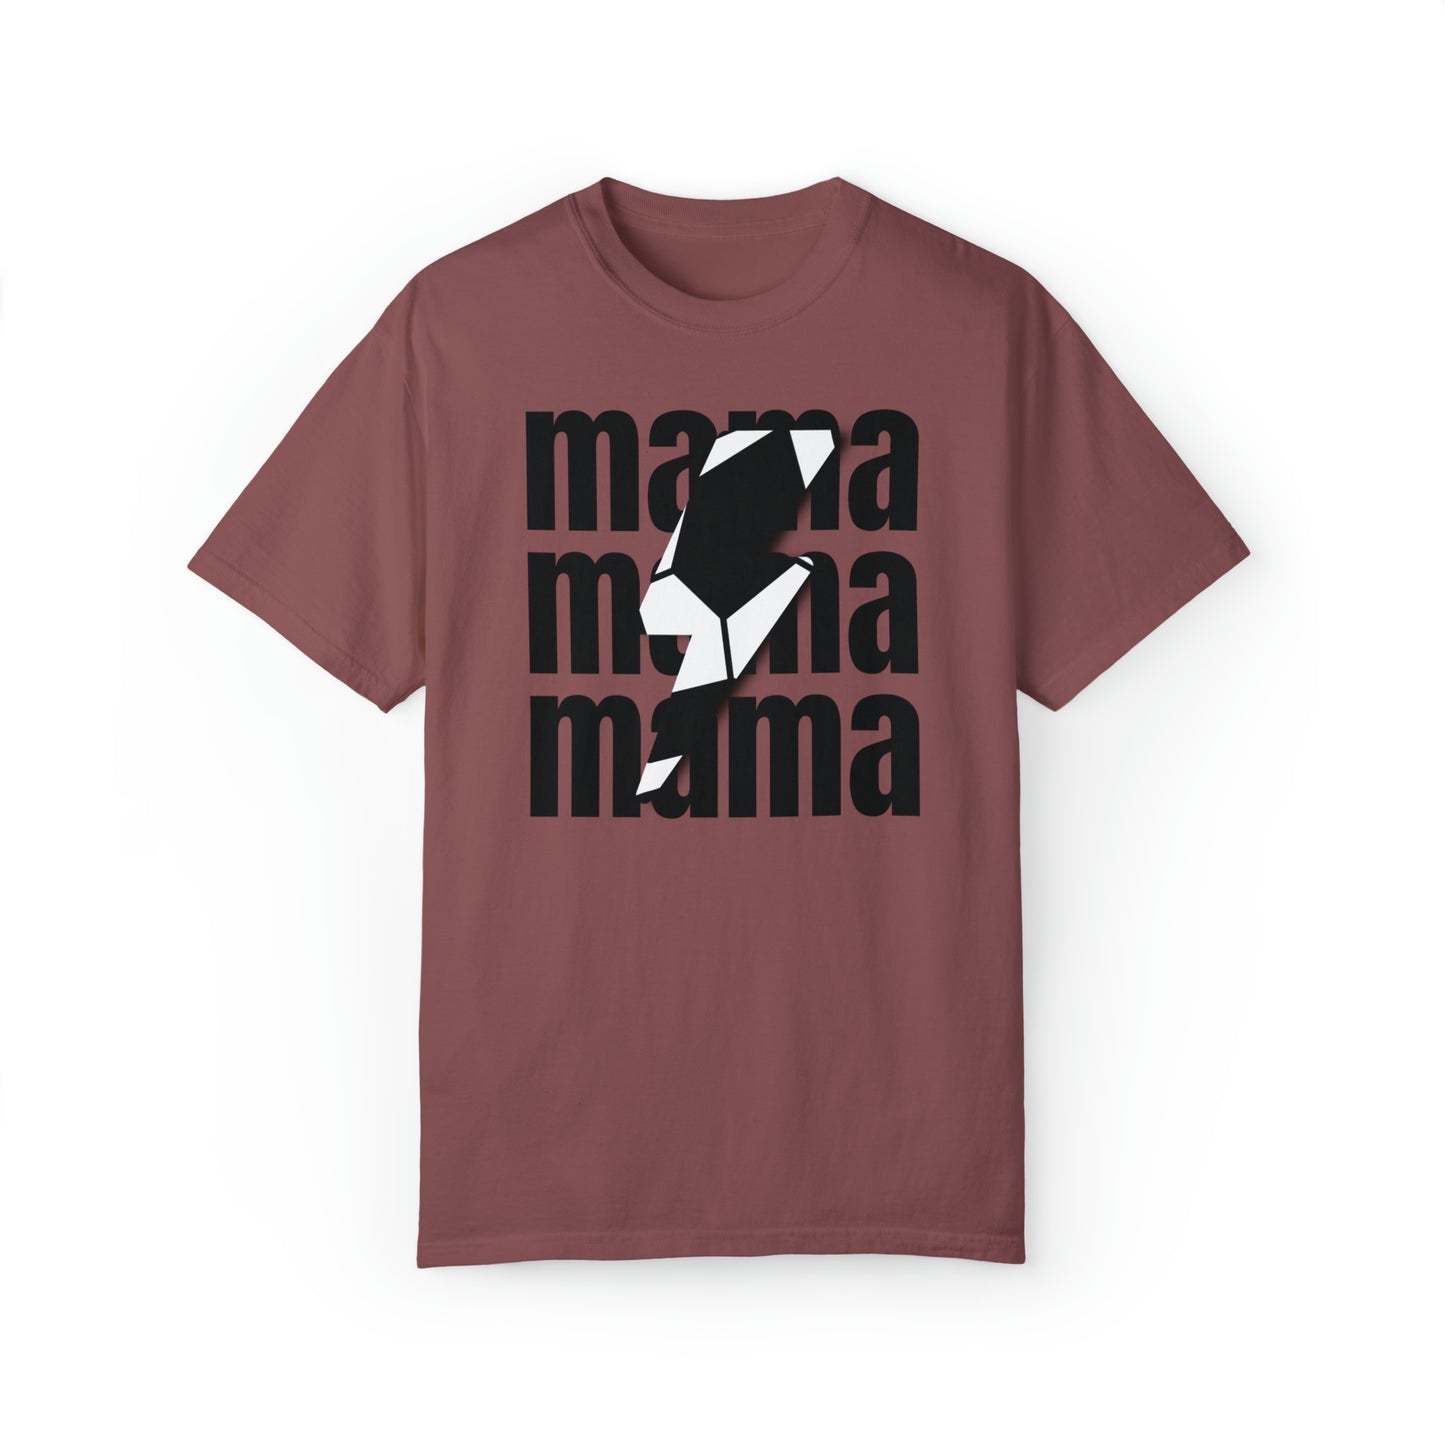 Soccer Mom Mama Shirt, Soccer Jersey, Mom Sports Game Day Shirt, Cool Trendy Cute Soccer Shirt, Mom Shirt, Gift for Mom, Coach Gift